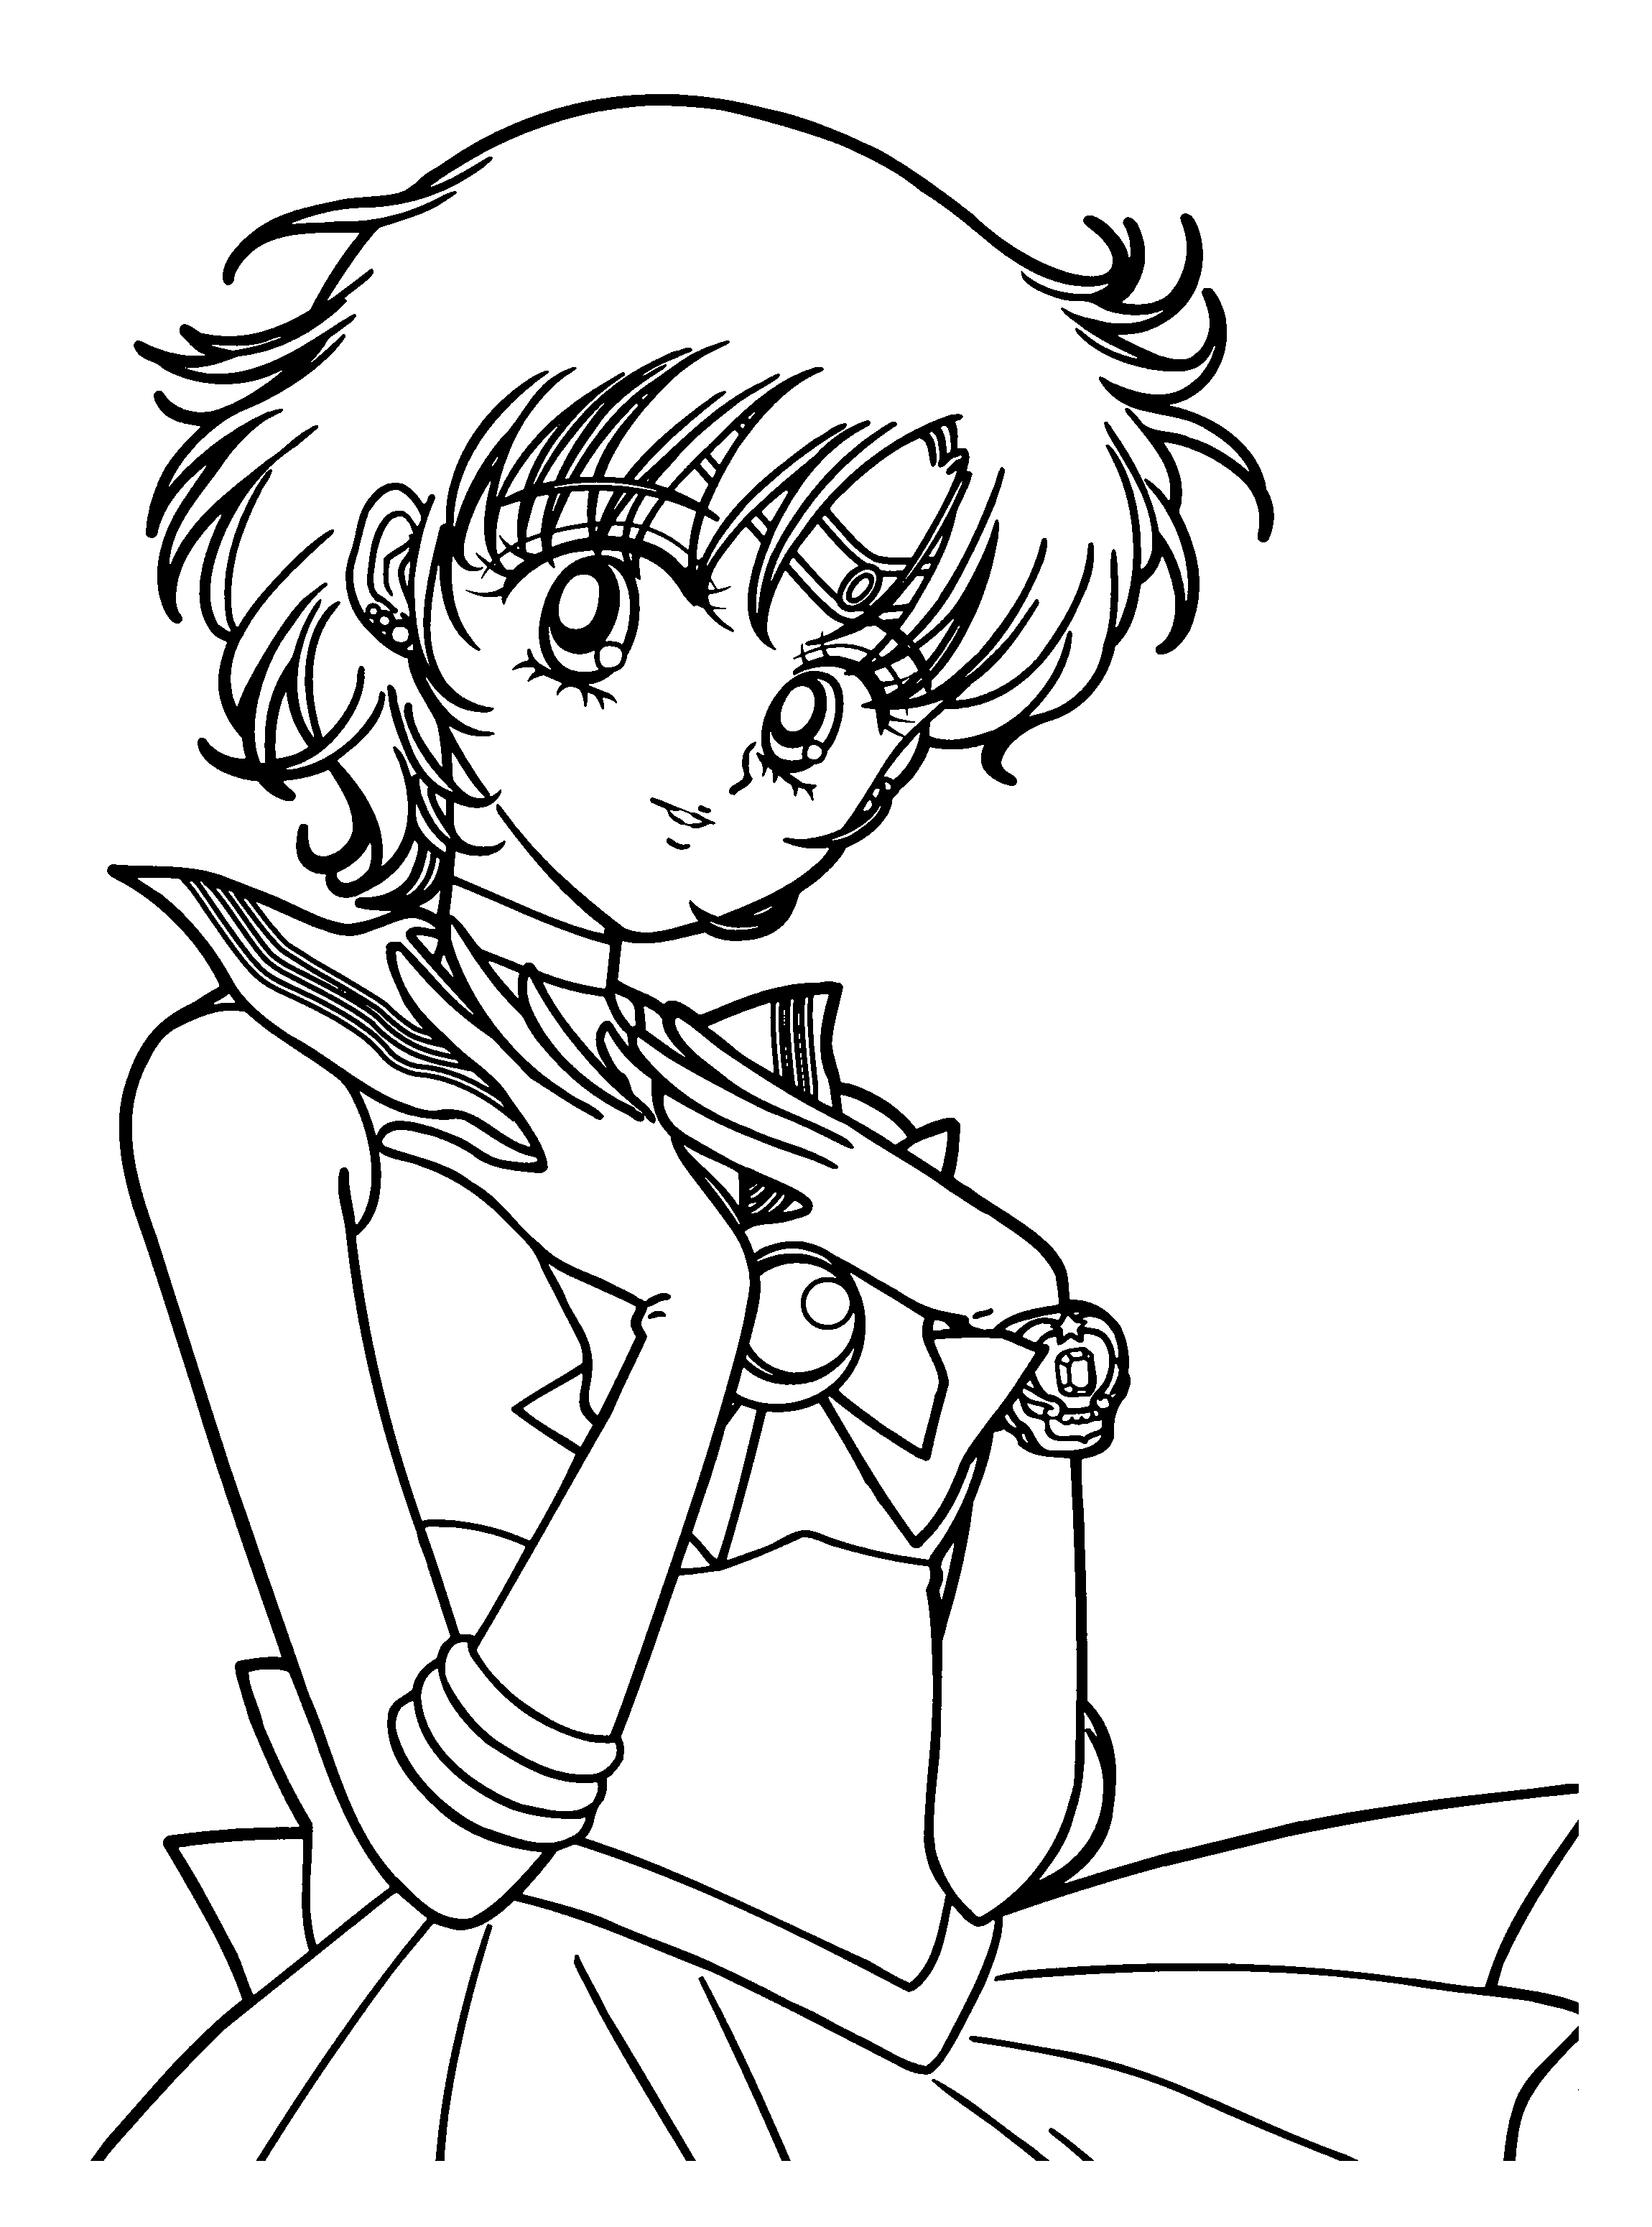 sailor moon coloring pages coloring page sailormoon coloring pages 8 anime sailor coloring pages moon 